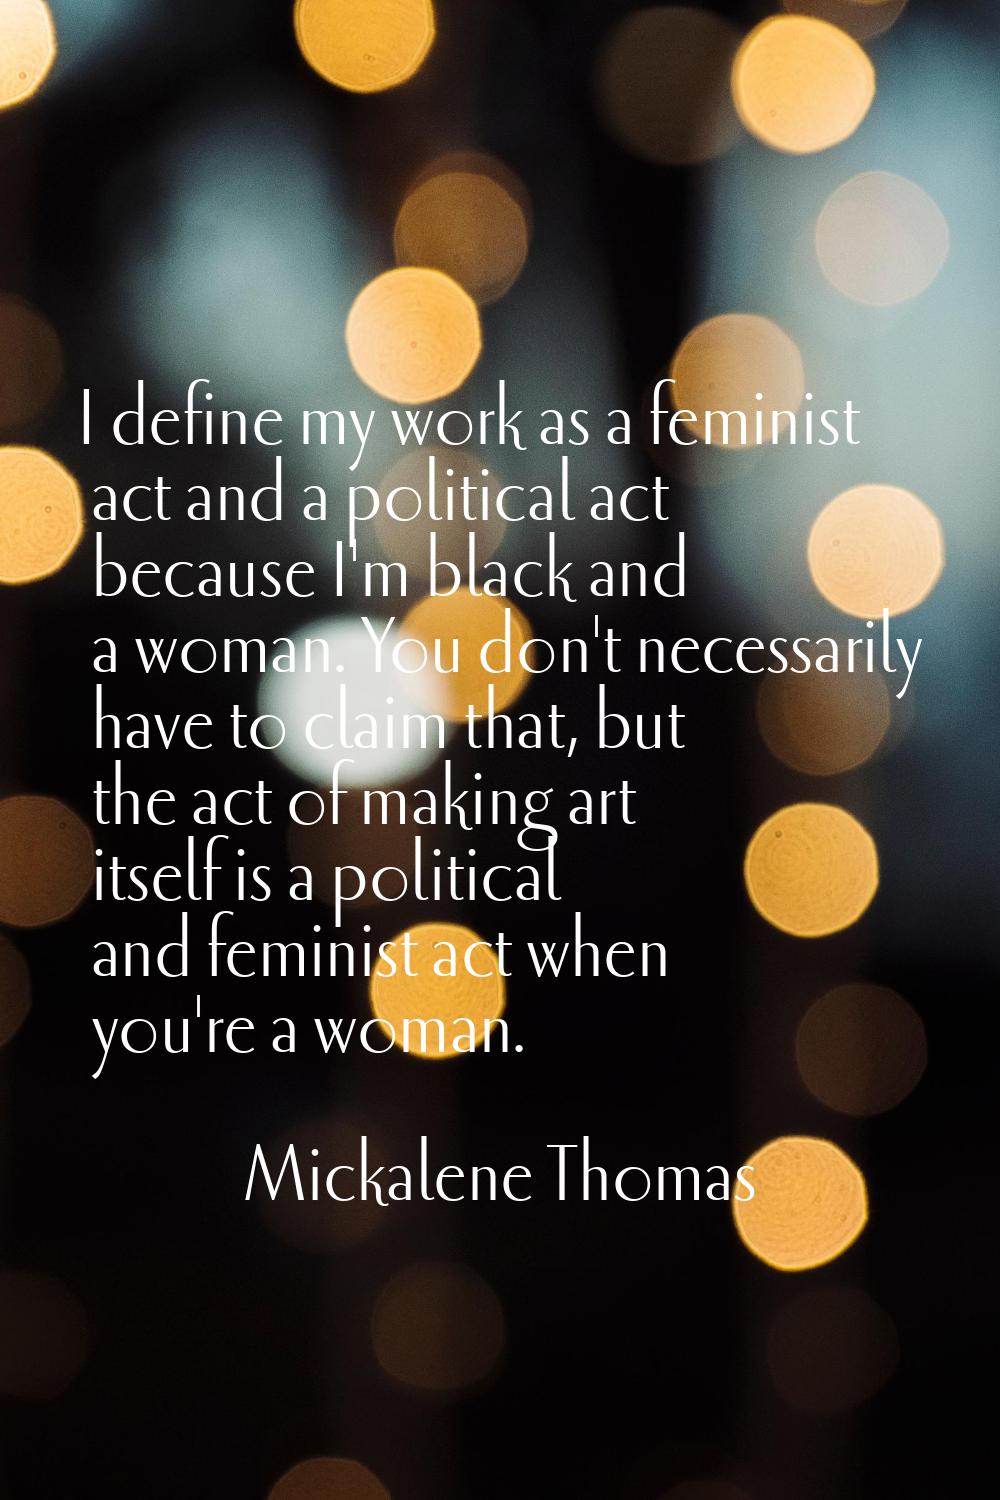 I define my work as a feminist act and a political act because I'm black and a woman. You don't nec